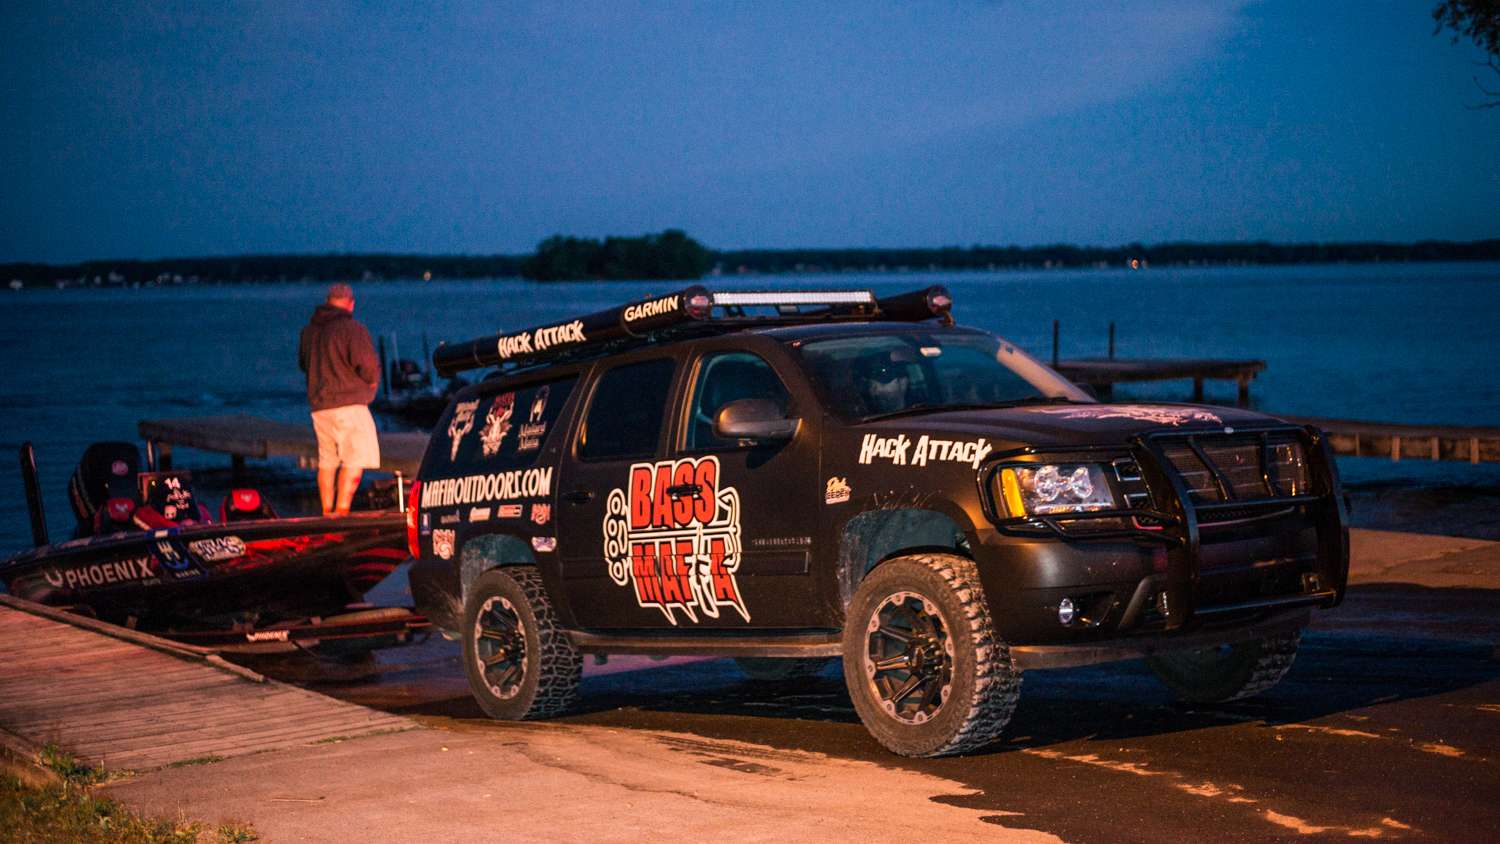 Toyota AOY leader and Bassfest champion Greg Hackney launches next and slides off into the darkness to finish rigging his tackle. 